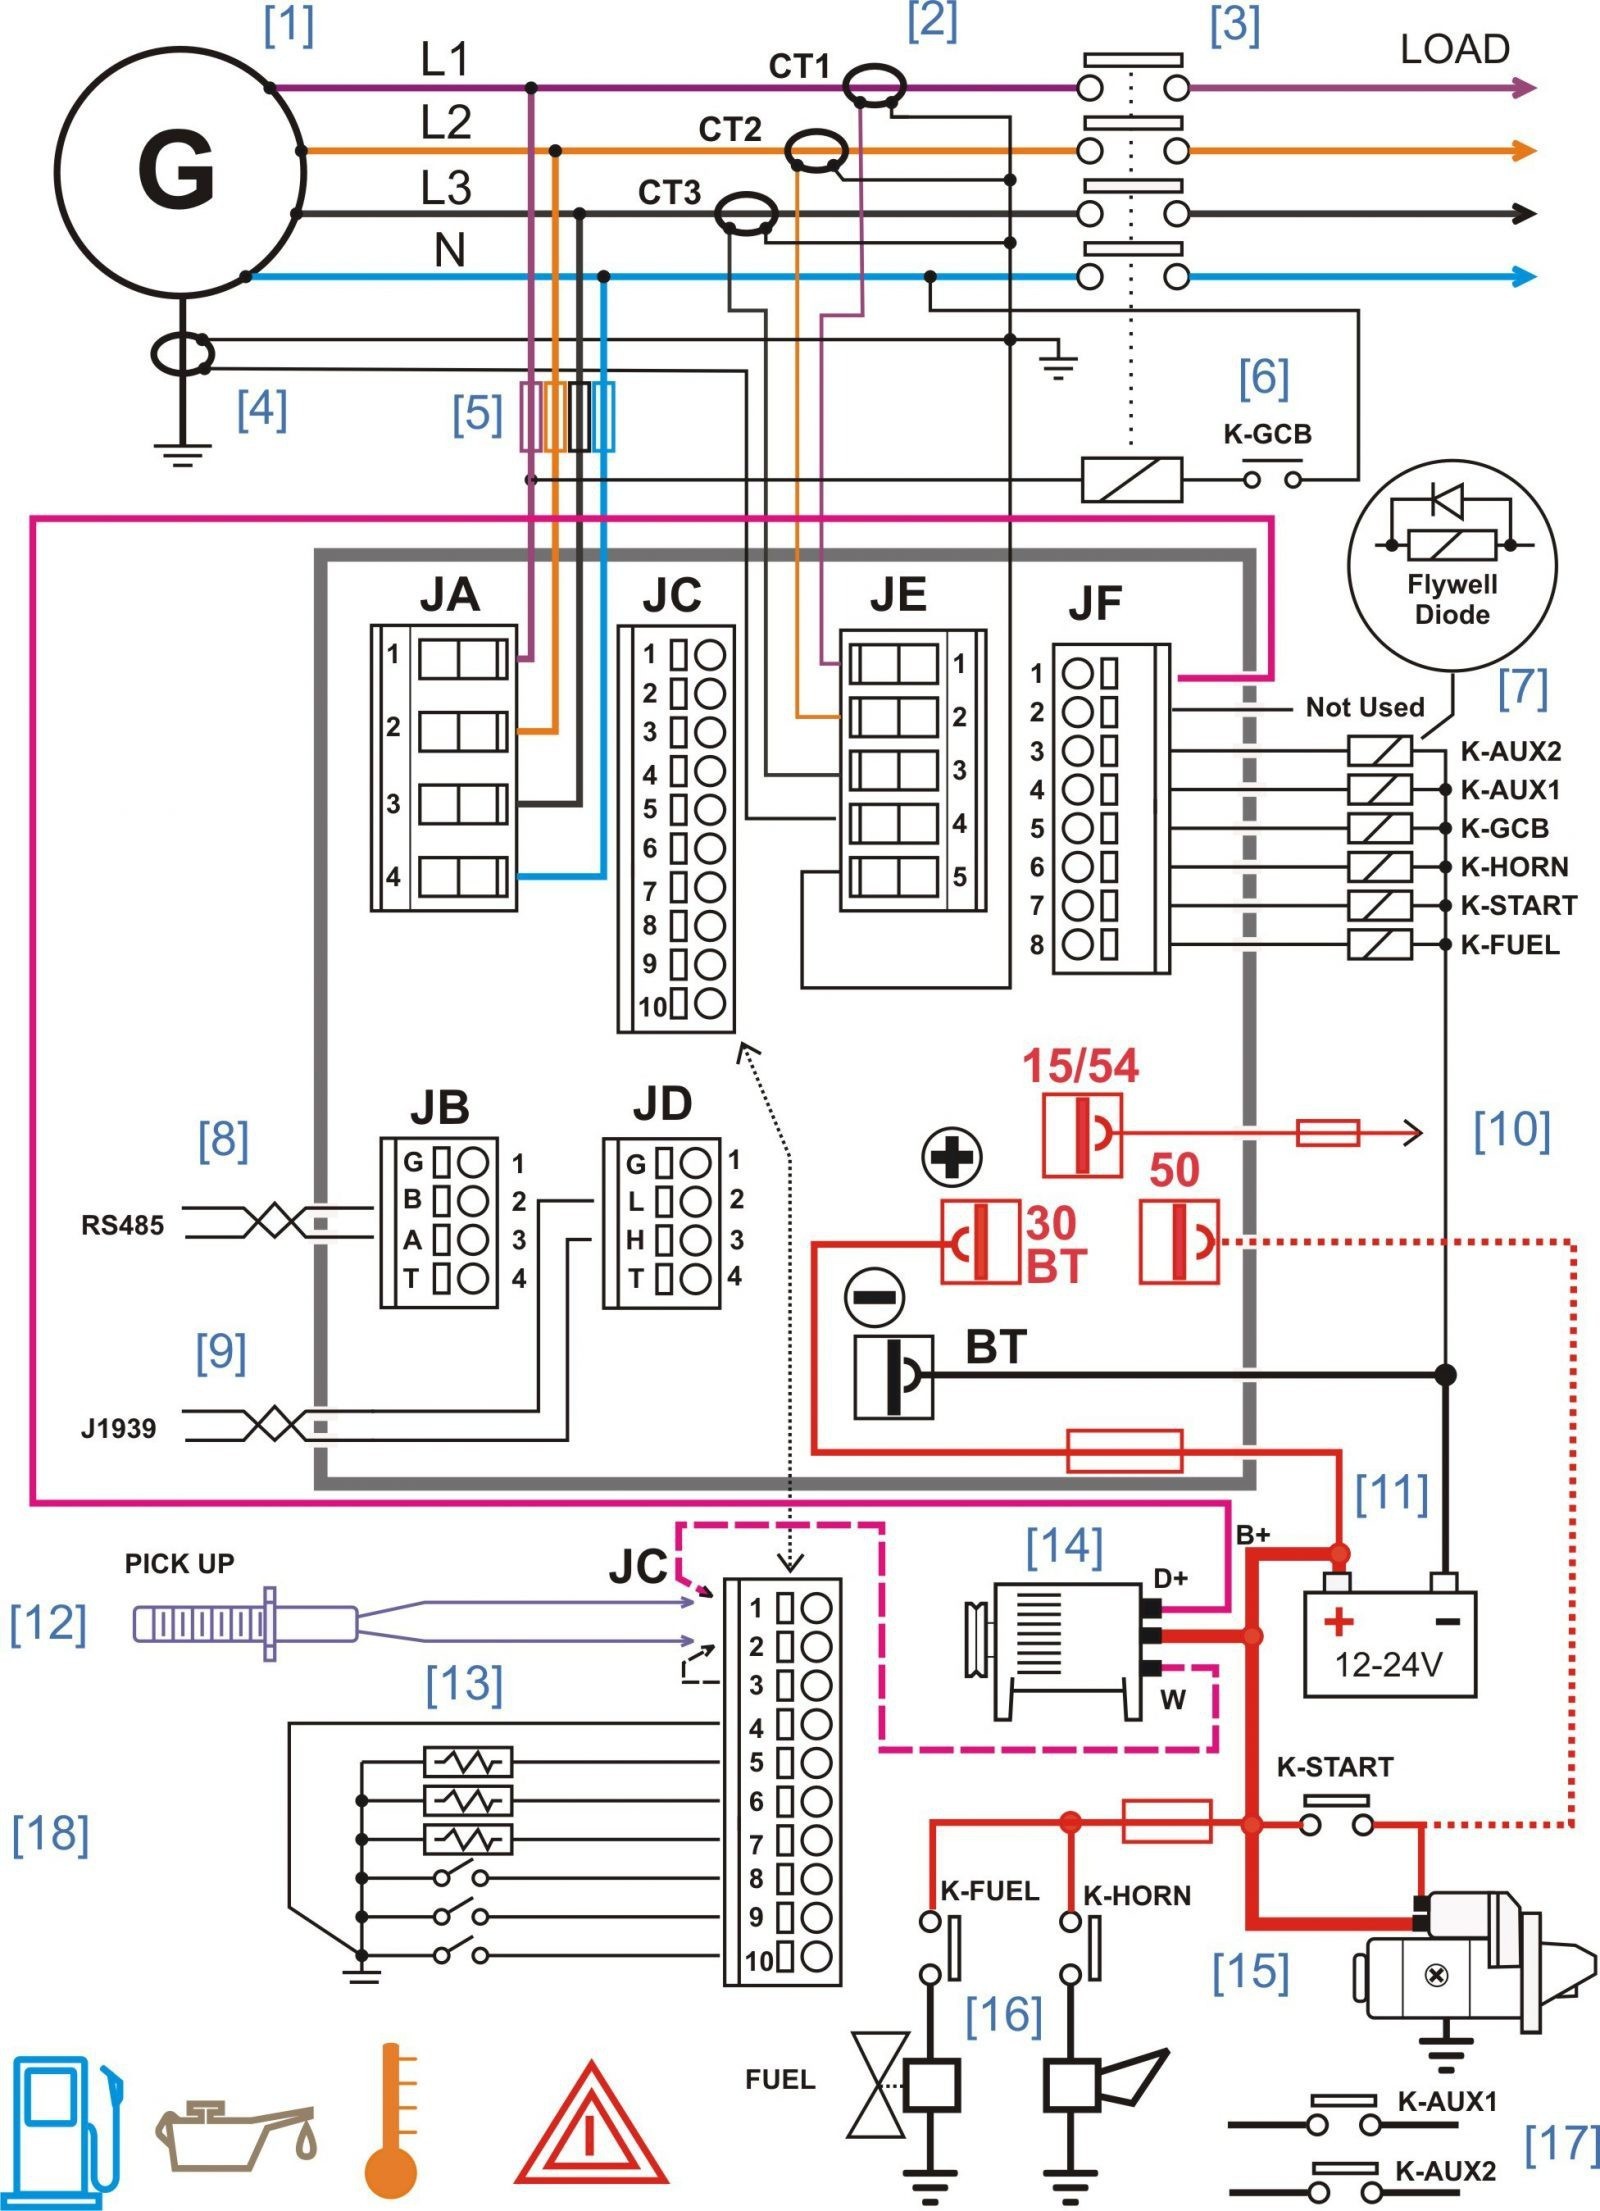 Clarion Wiring Diagram for Car Stereo Valid Pioneer Radio Wiring Diagram Best Lovely Car Stereo Wiring